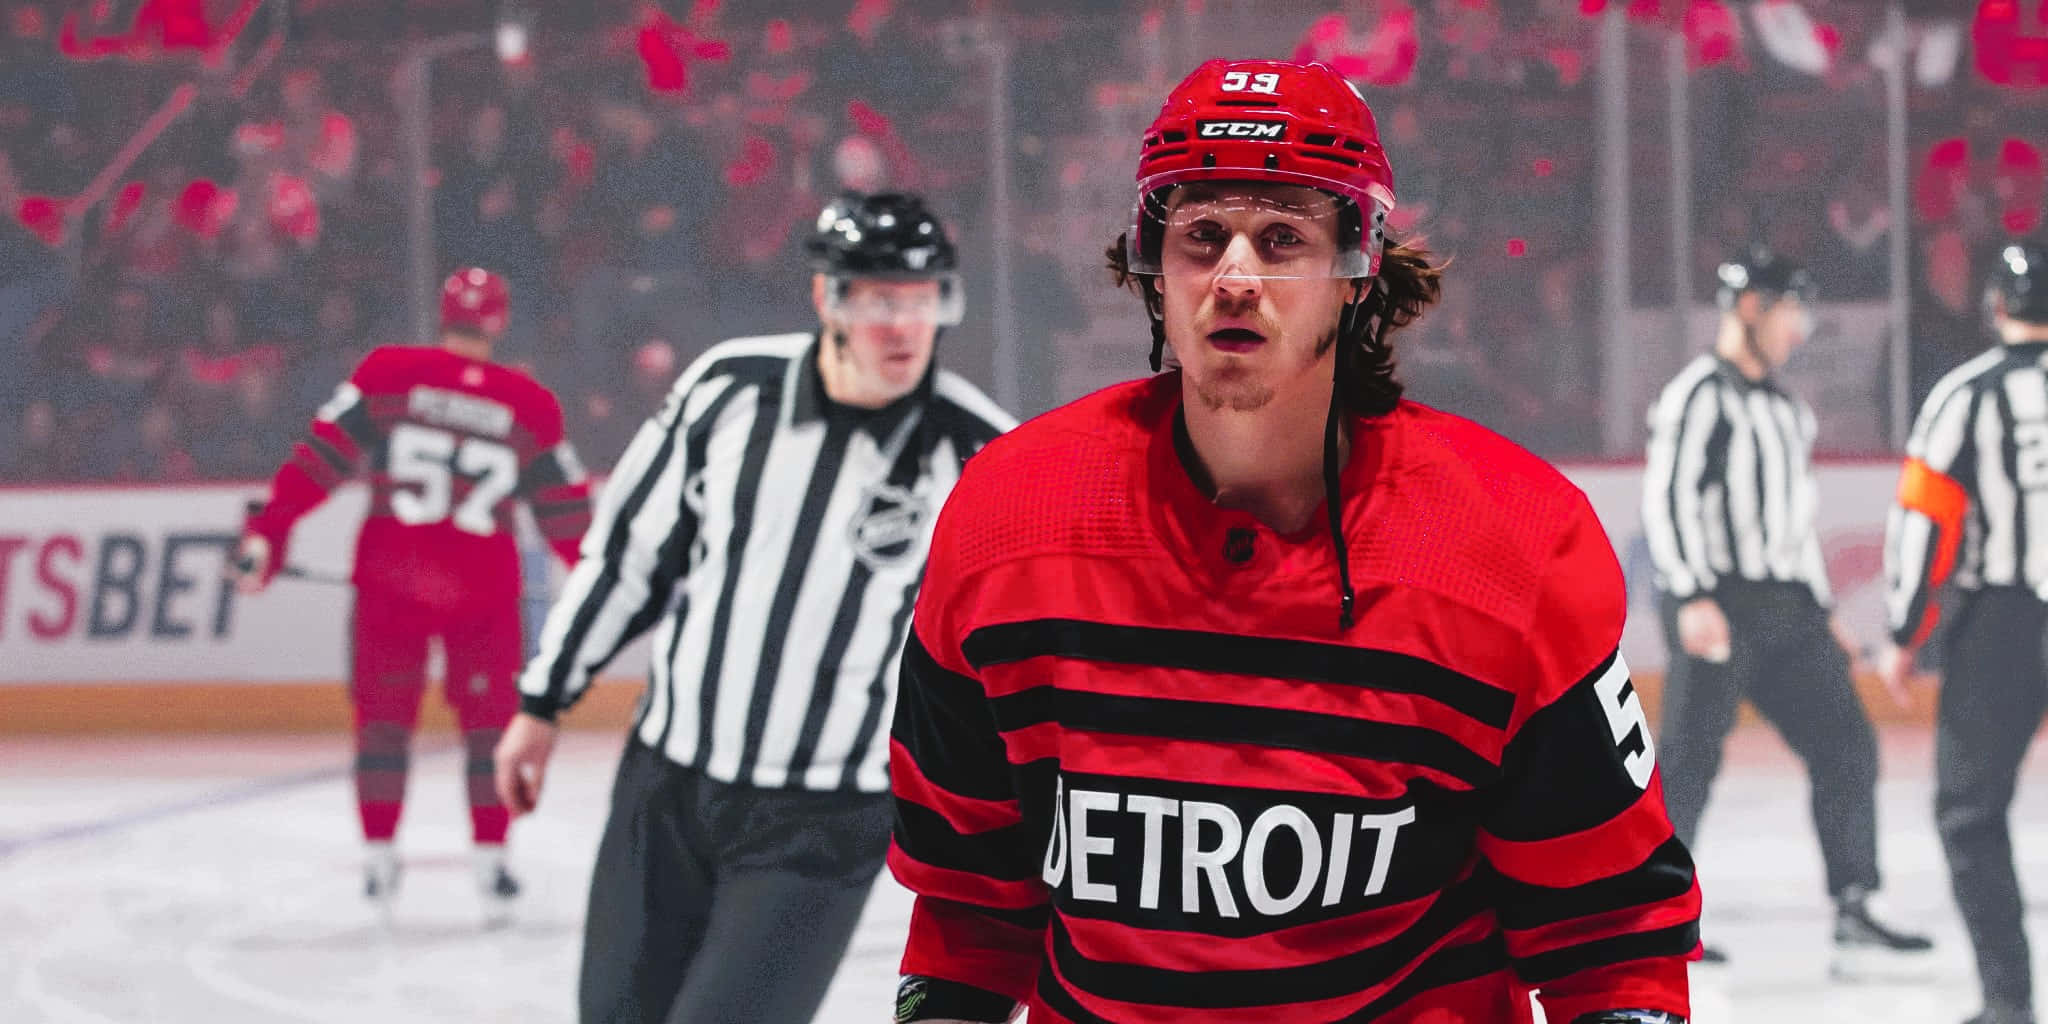 Download Tyler Bertuzzi in action during a hockey game Wallpaper